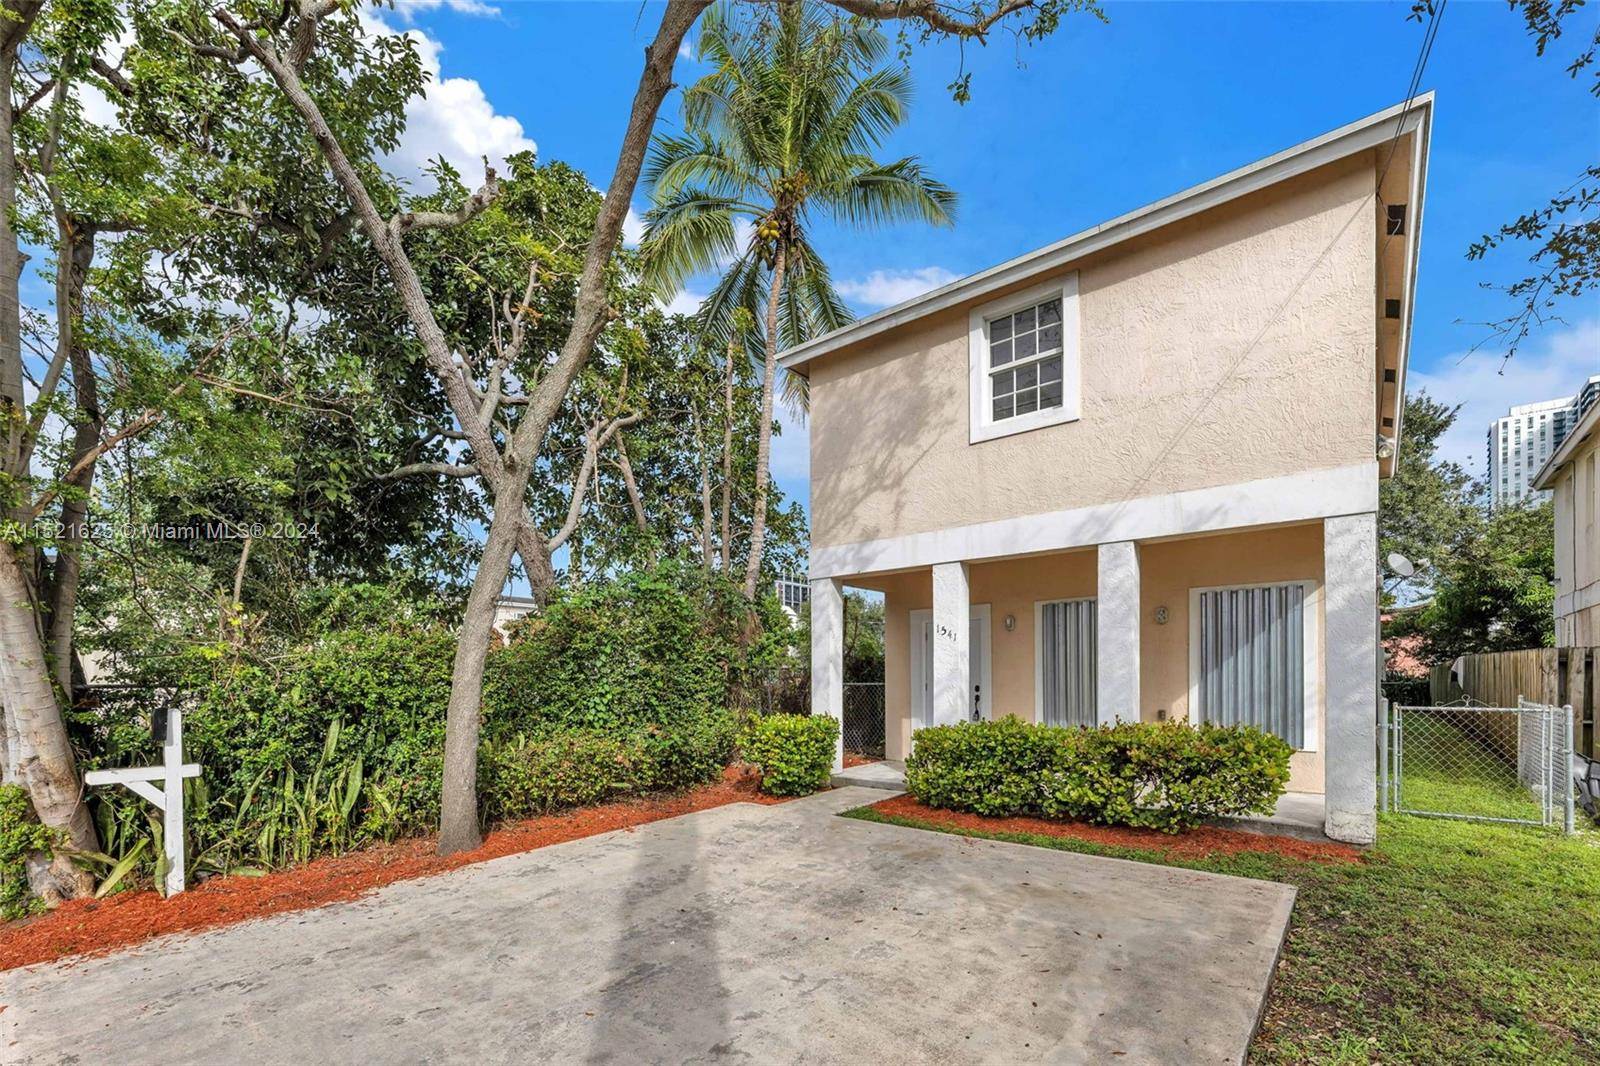 Fully Renovated, 2 story house in the Historical District of Overtown.